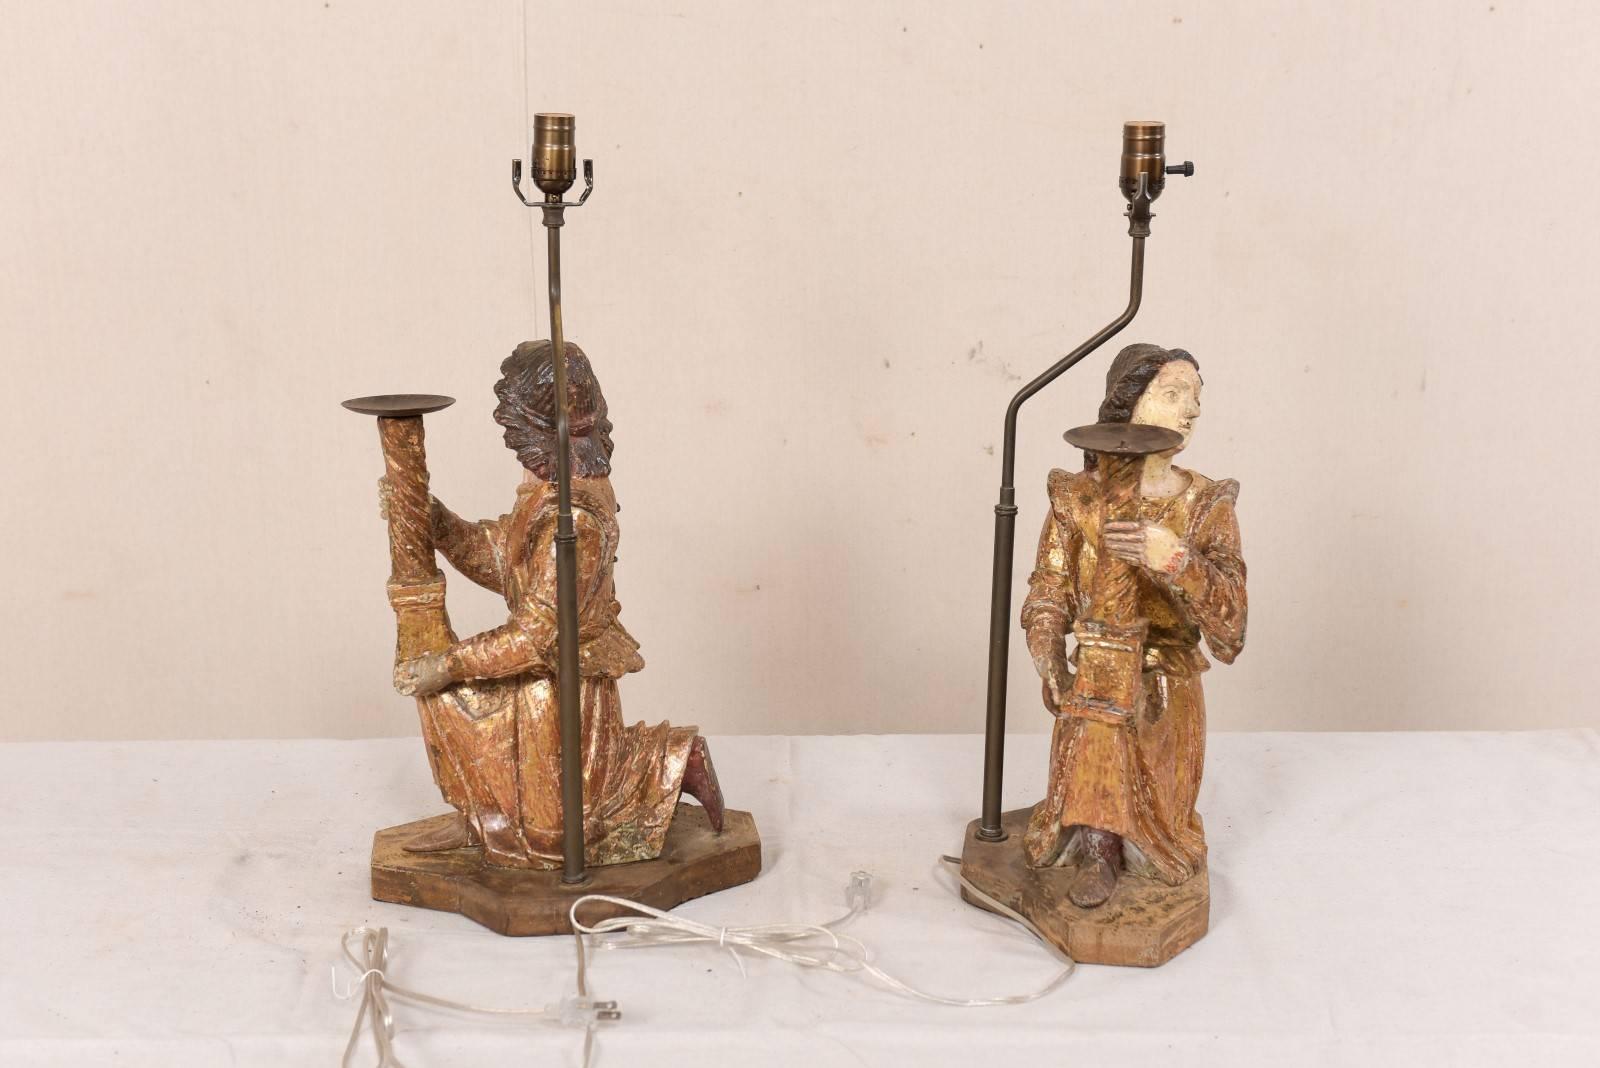 Pair of 18th Century Italian Hand-Carved and Painted Wood Figurative Table Lamps For Sale 6